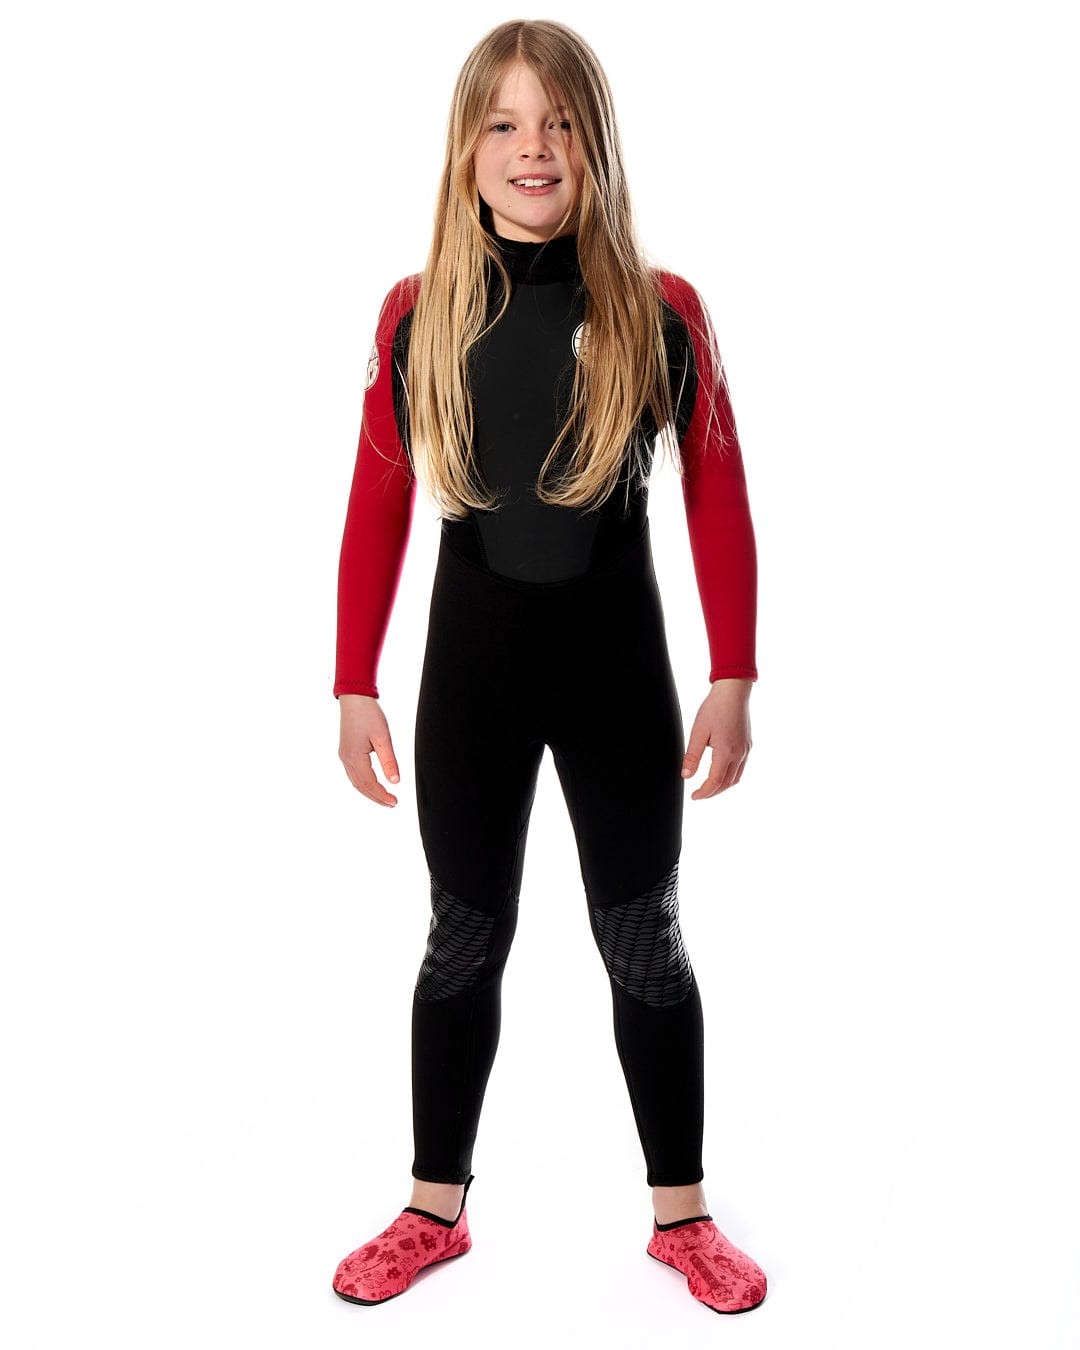 A young girl in a Saltrock Core - Kids 3/2 Full Wetsuit - Black/Red posing for a photo.